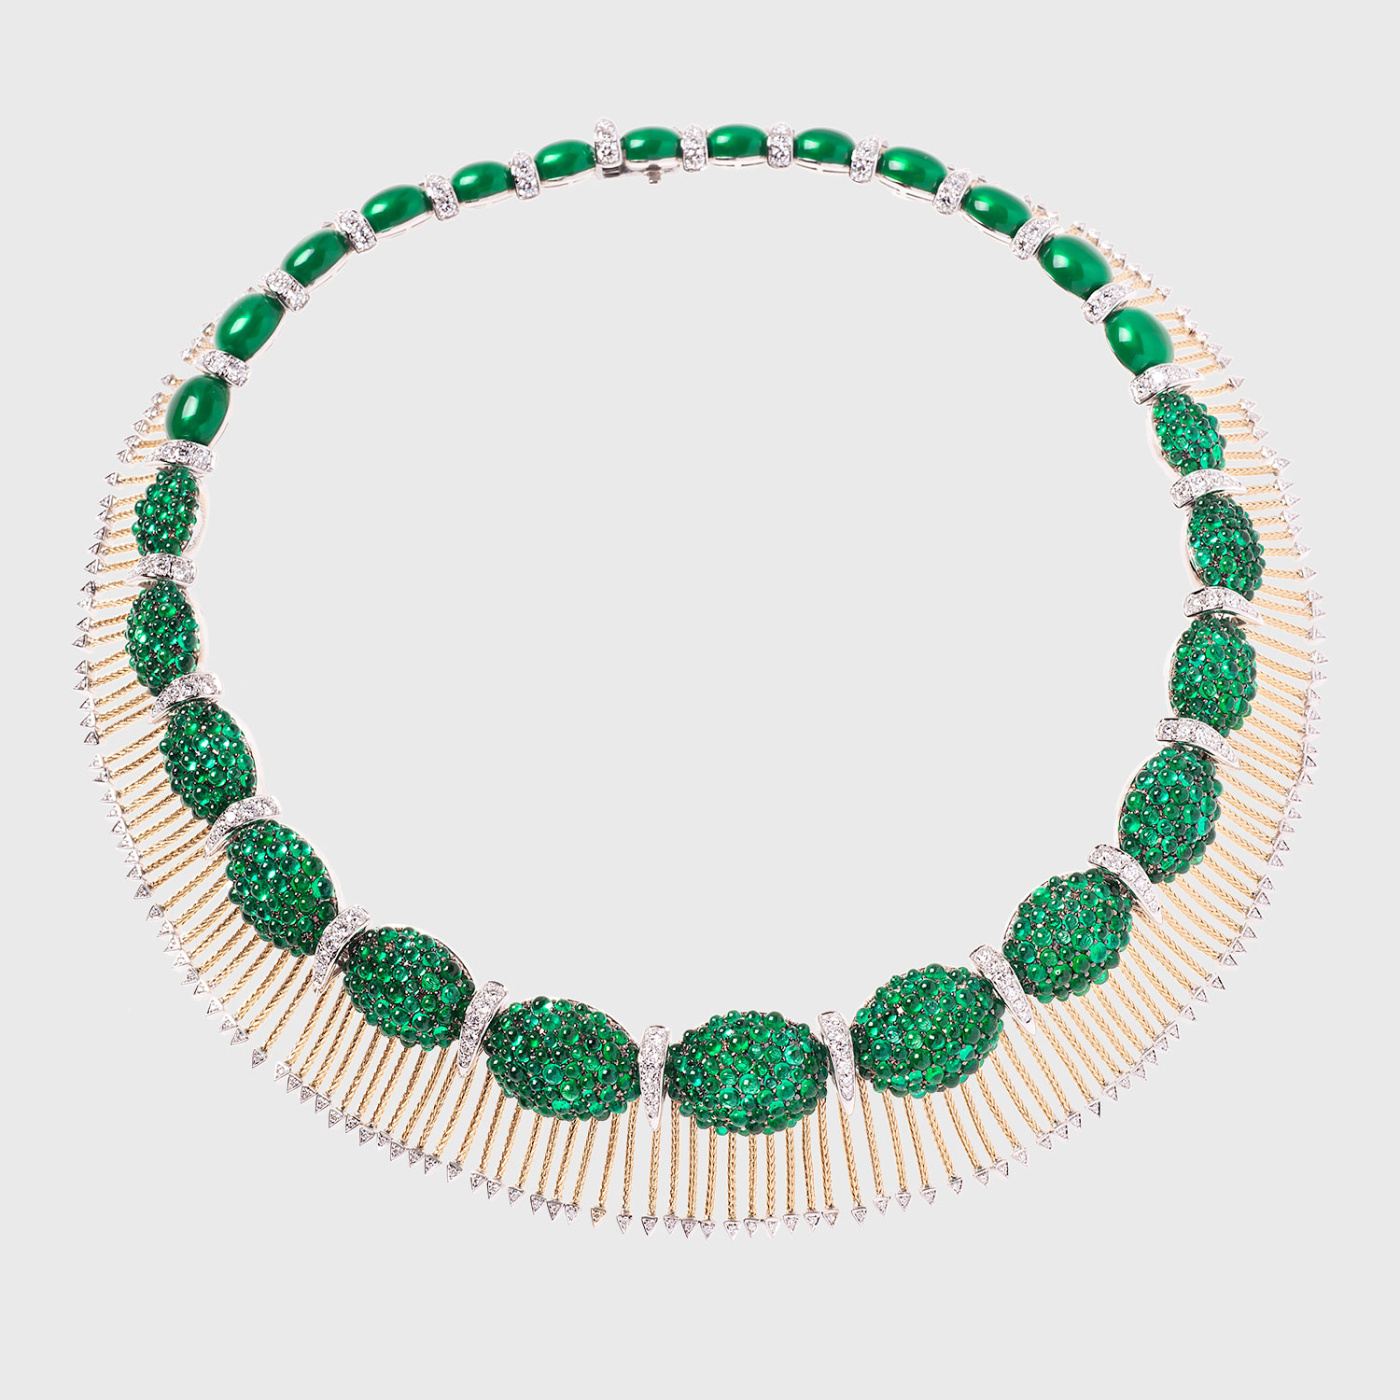 Yellow gold fringe necklace with emeralds, white diamonds and green enamel